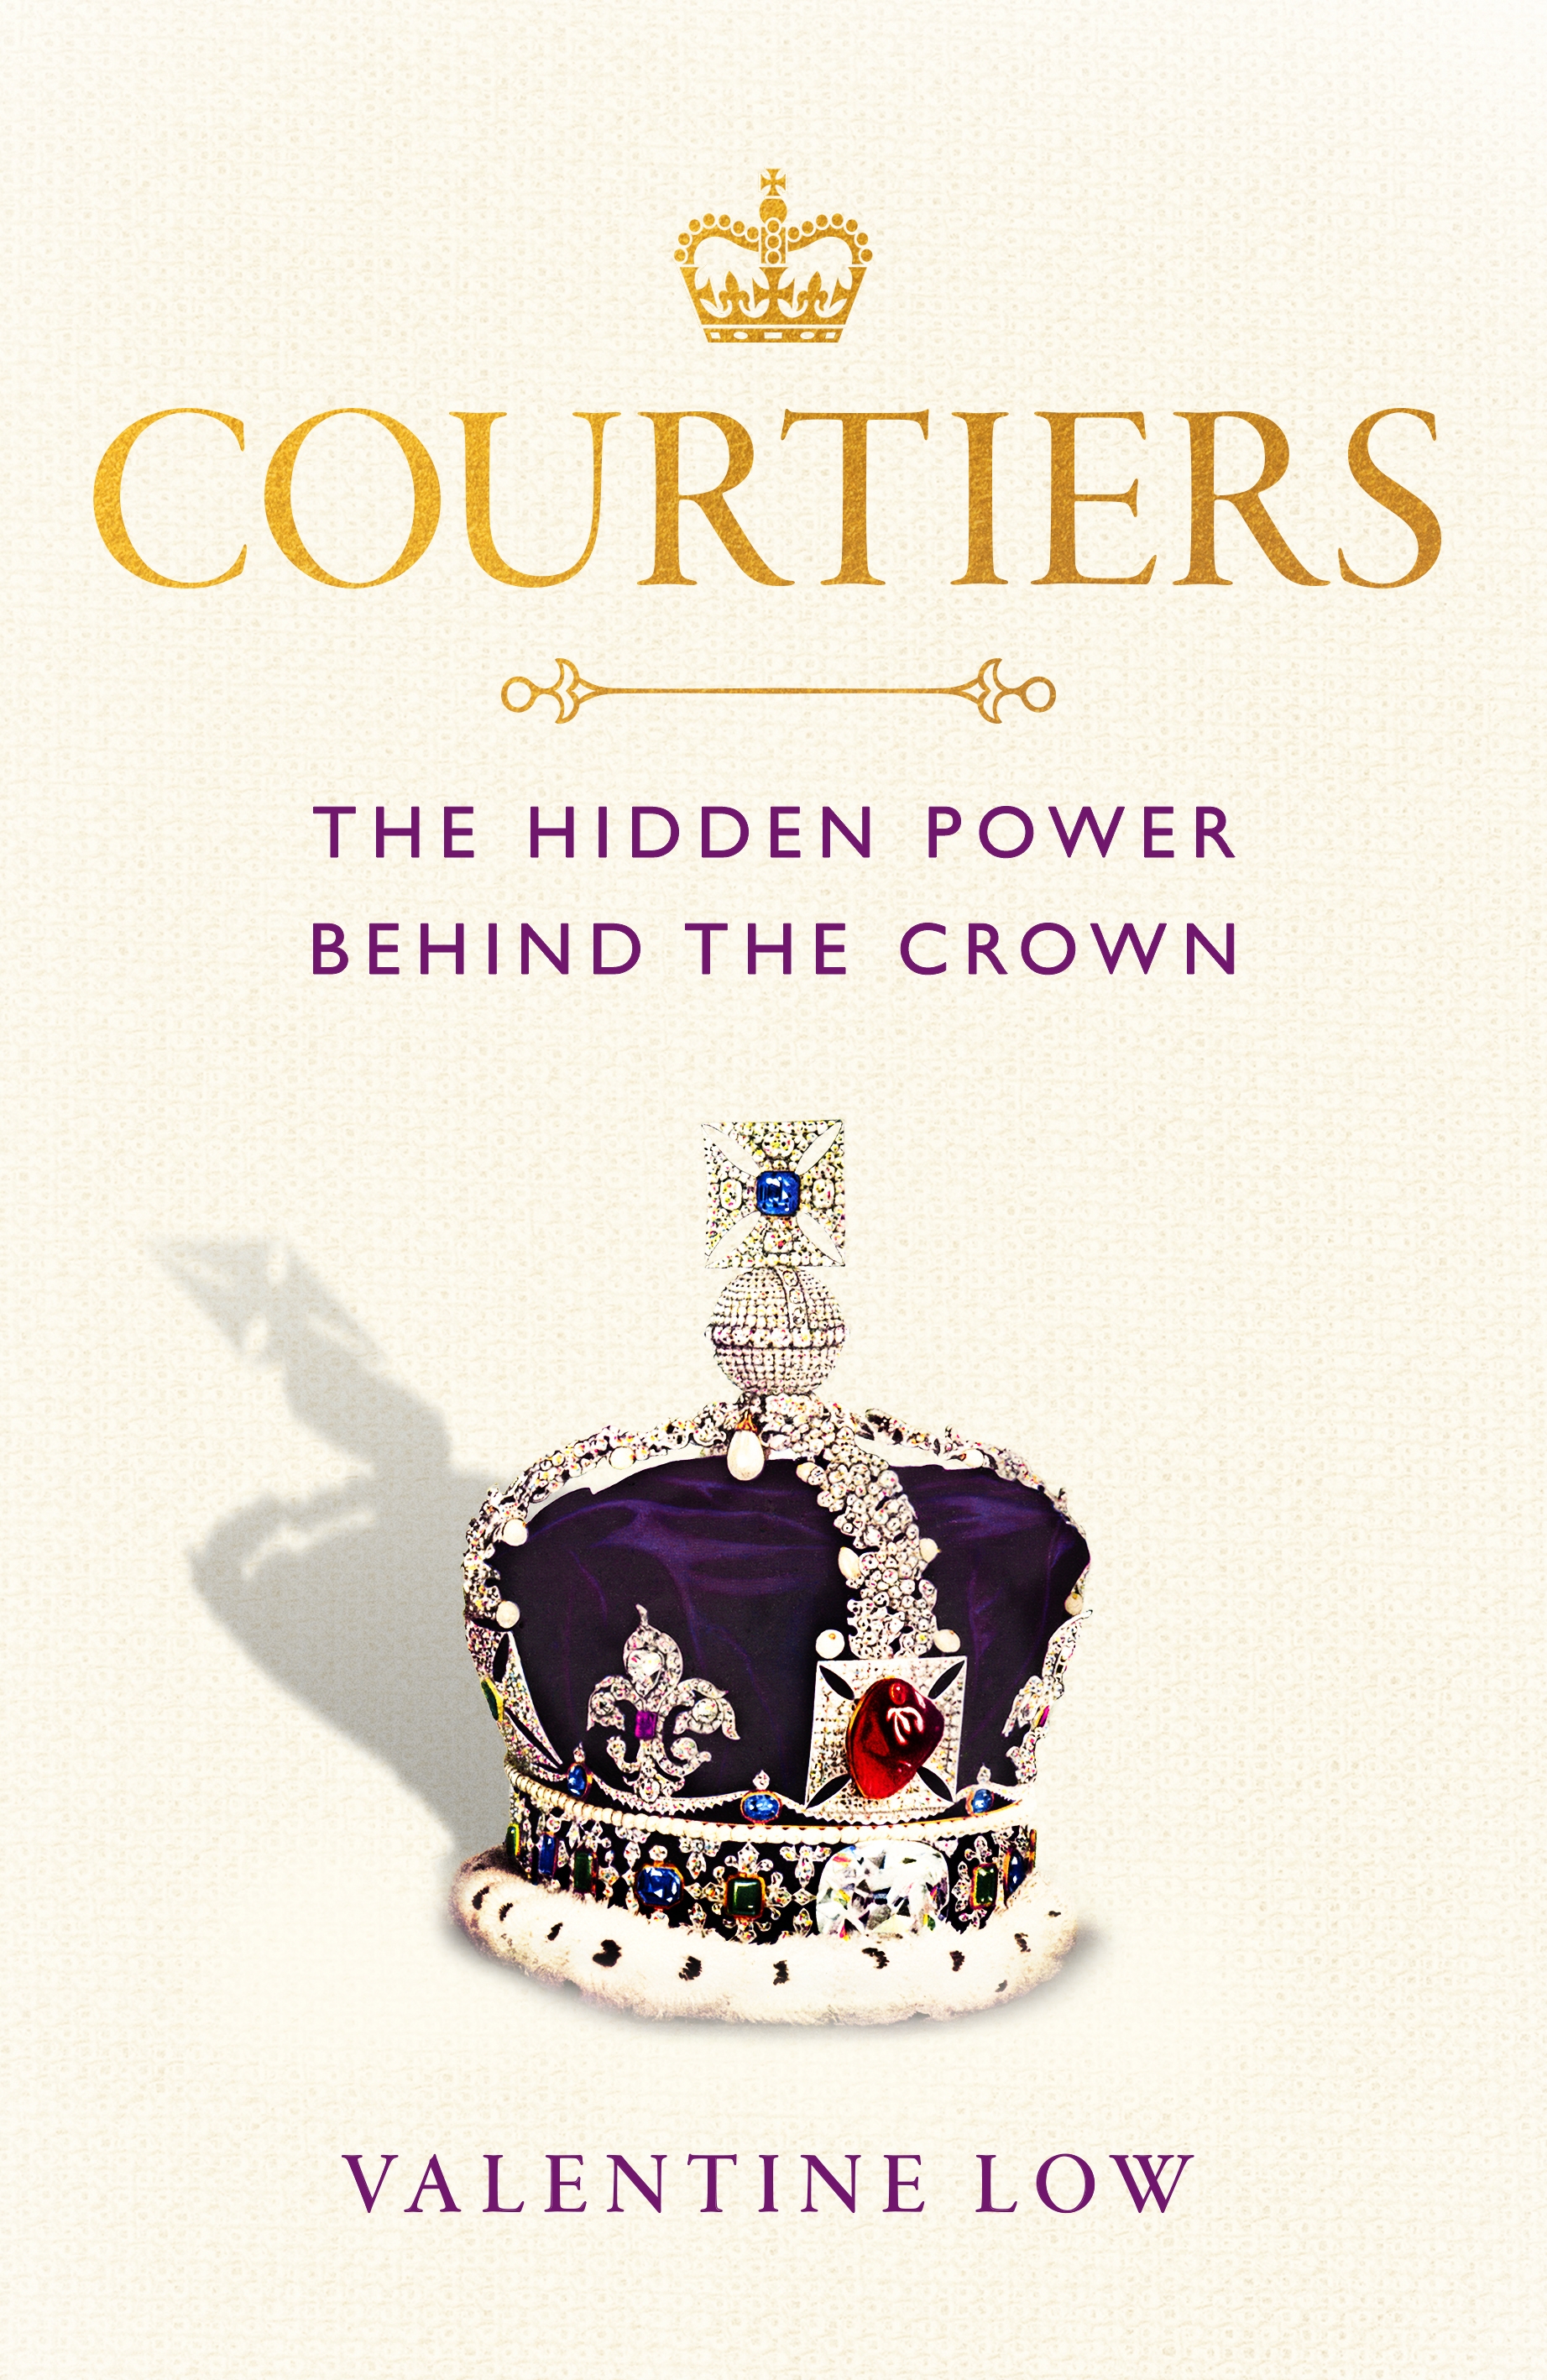 Courtiers, The Hidden Power Behind The Crown